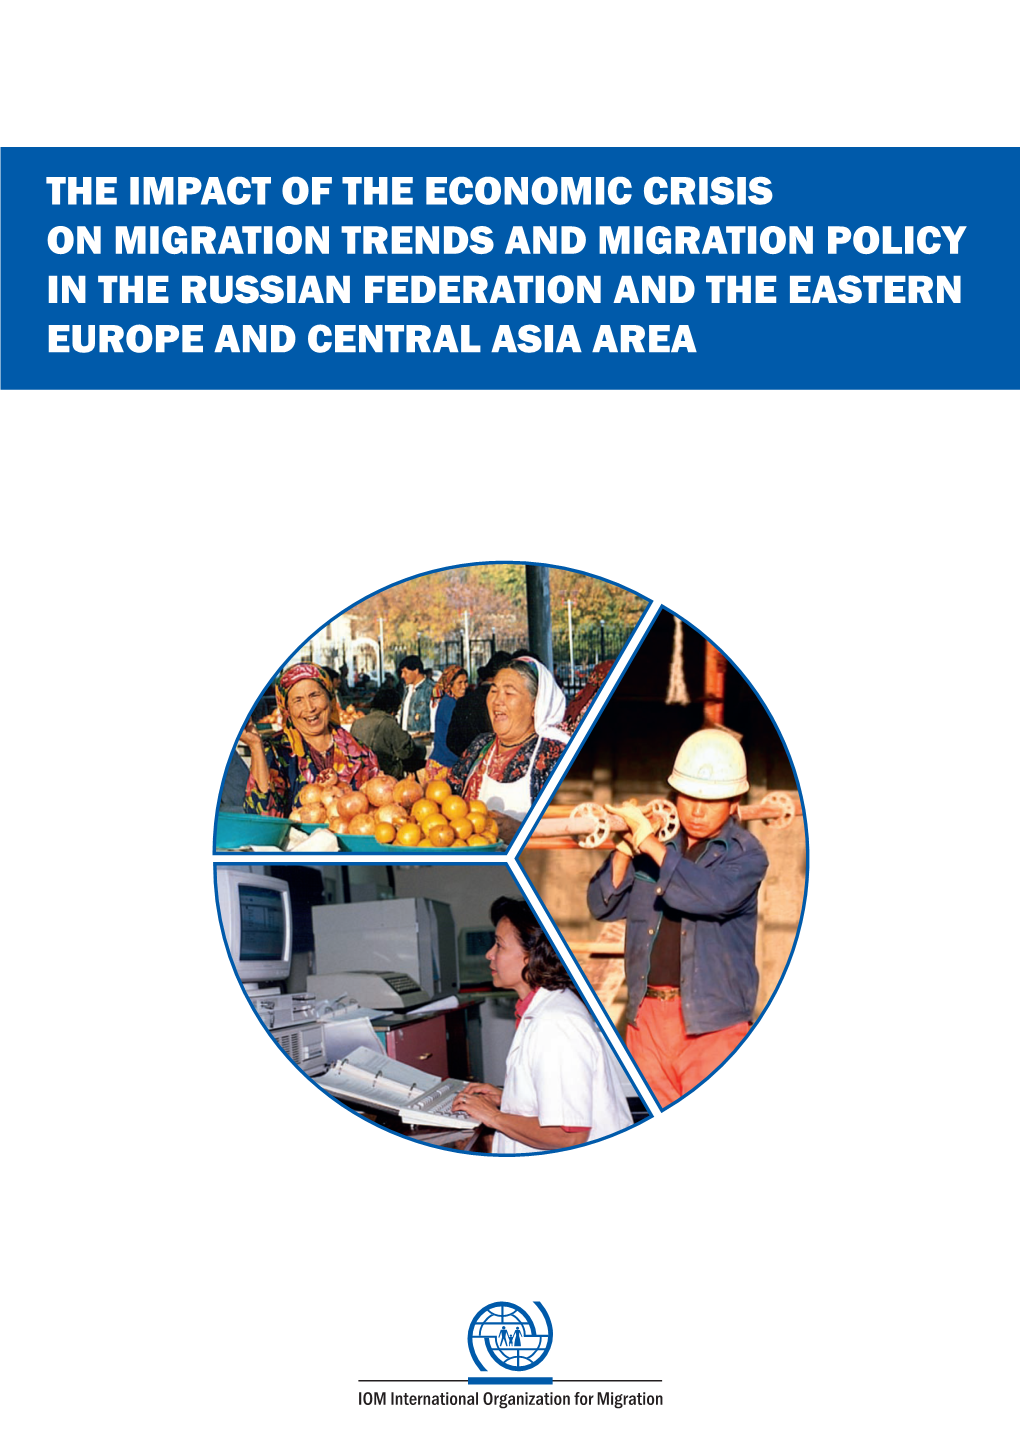 The Impact of the Economic Crisis on Migration Trends and Migration Policy in the Russian Federation and the Eastern Europe and Central Asia Area